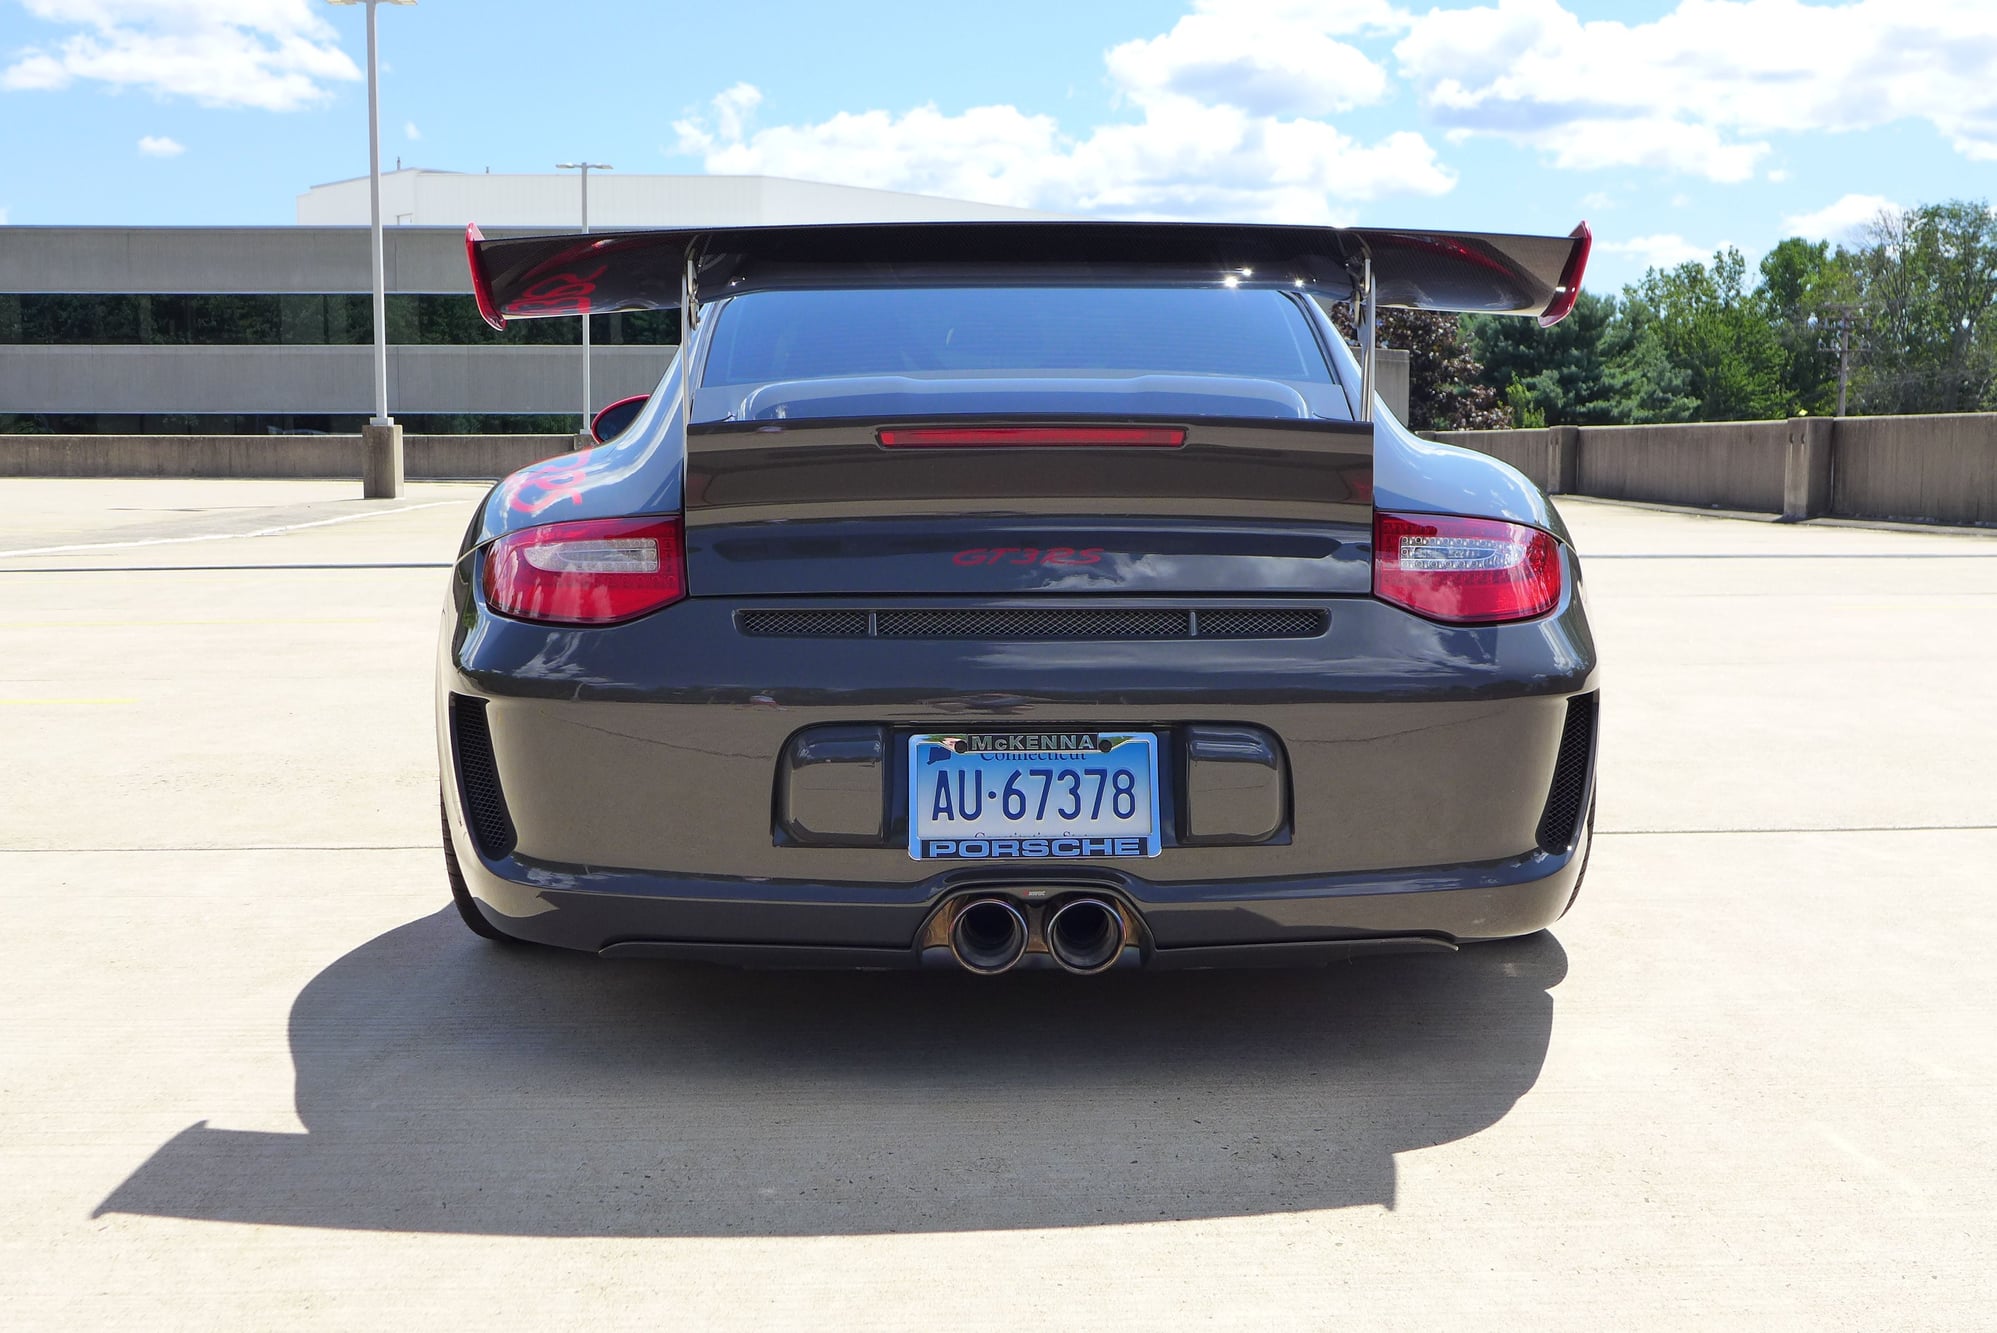 2010 Porsche GT3 - 2010 GT3RS - Black/Grey - 21k Miles - Used - VIN WP0AC2A9XAS783676 - 21,750 Miles - 6 cyl - 2WD - Manual - Coupe - Gray - Stratford, CT 06614, United States